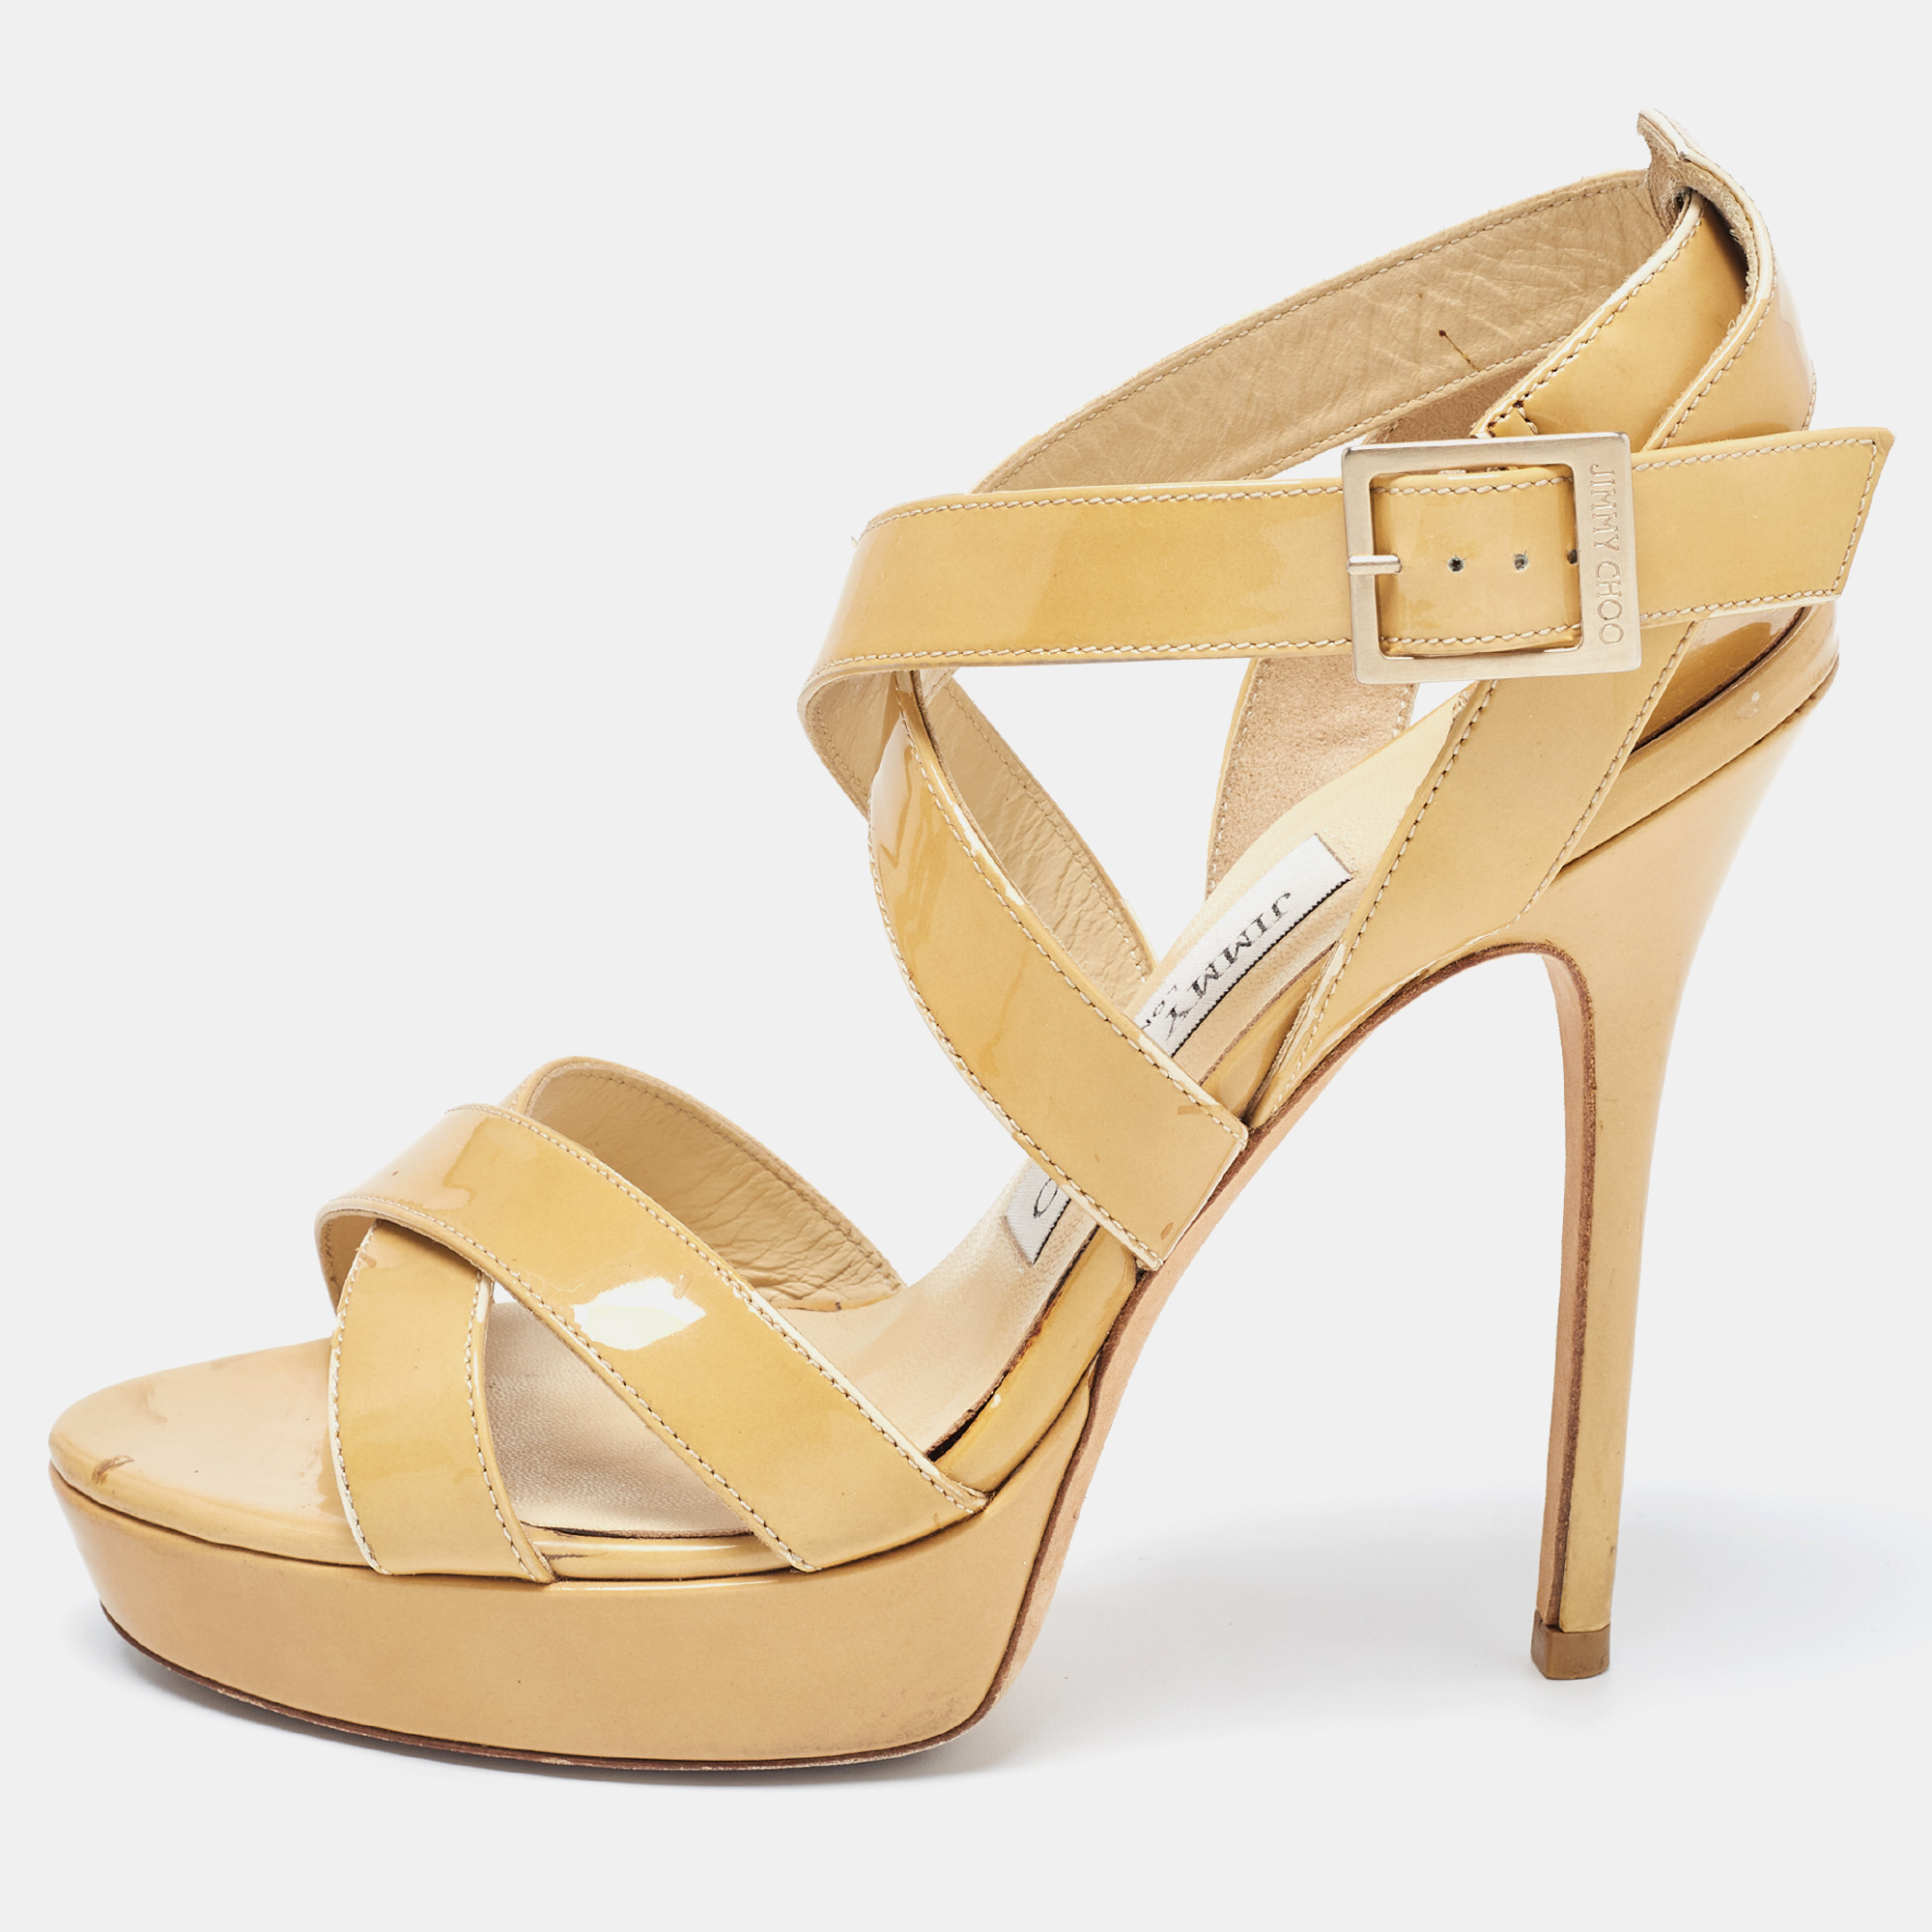 Pre-owned Jimmy Choo Beige Patent Leather Vamp Ankle Strap Sandals Size 37